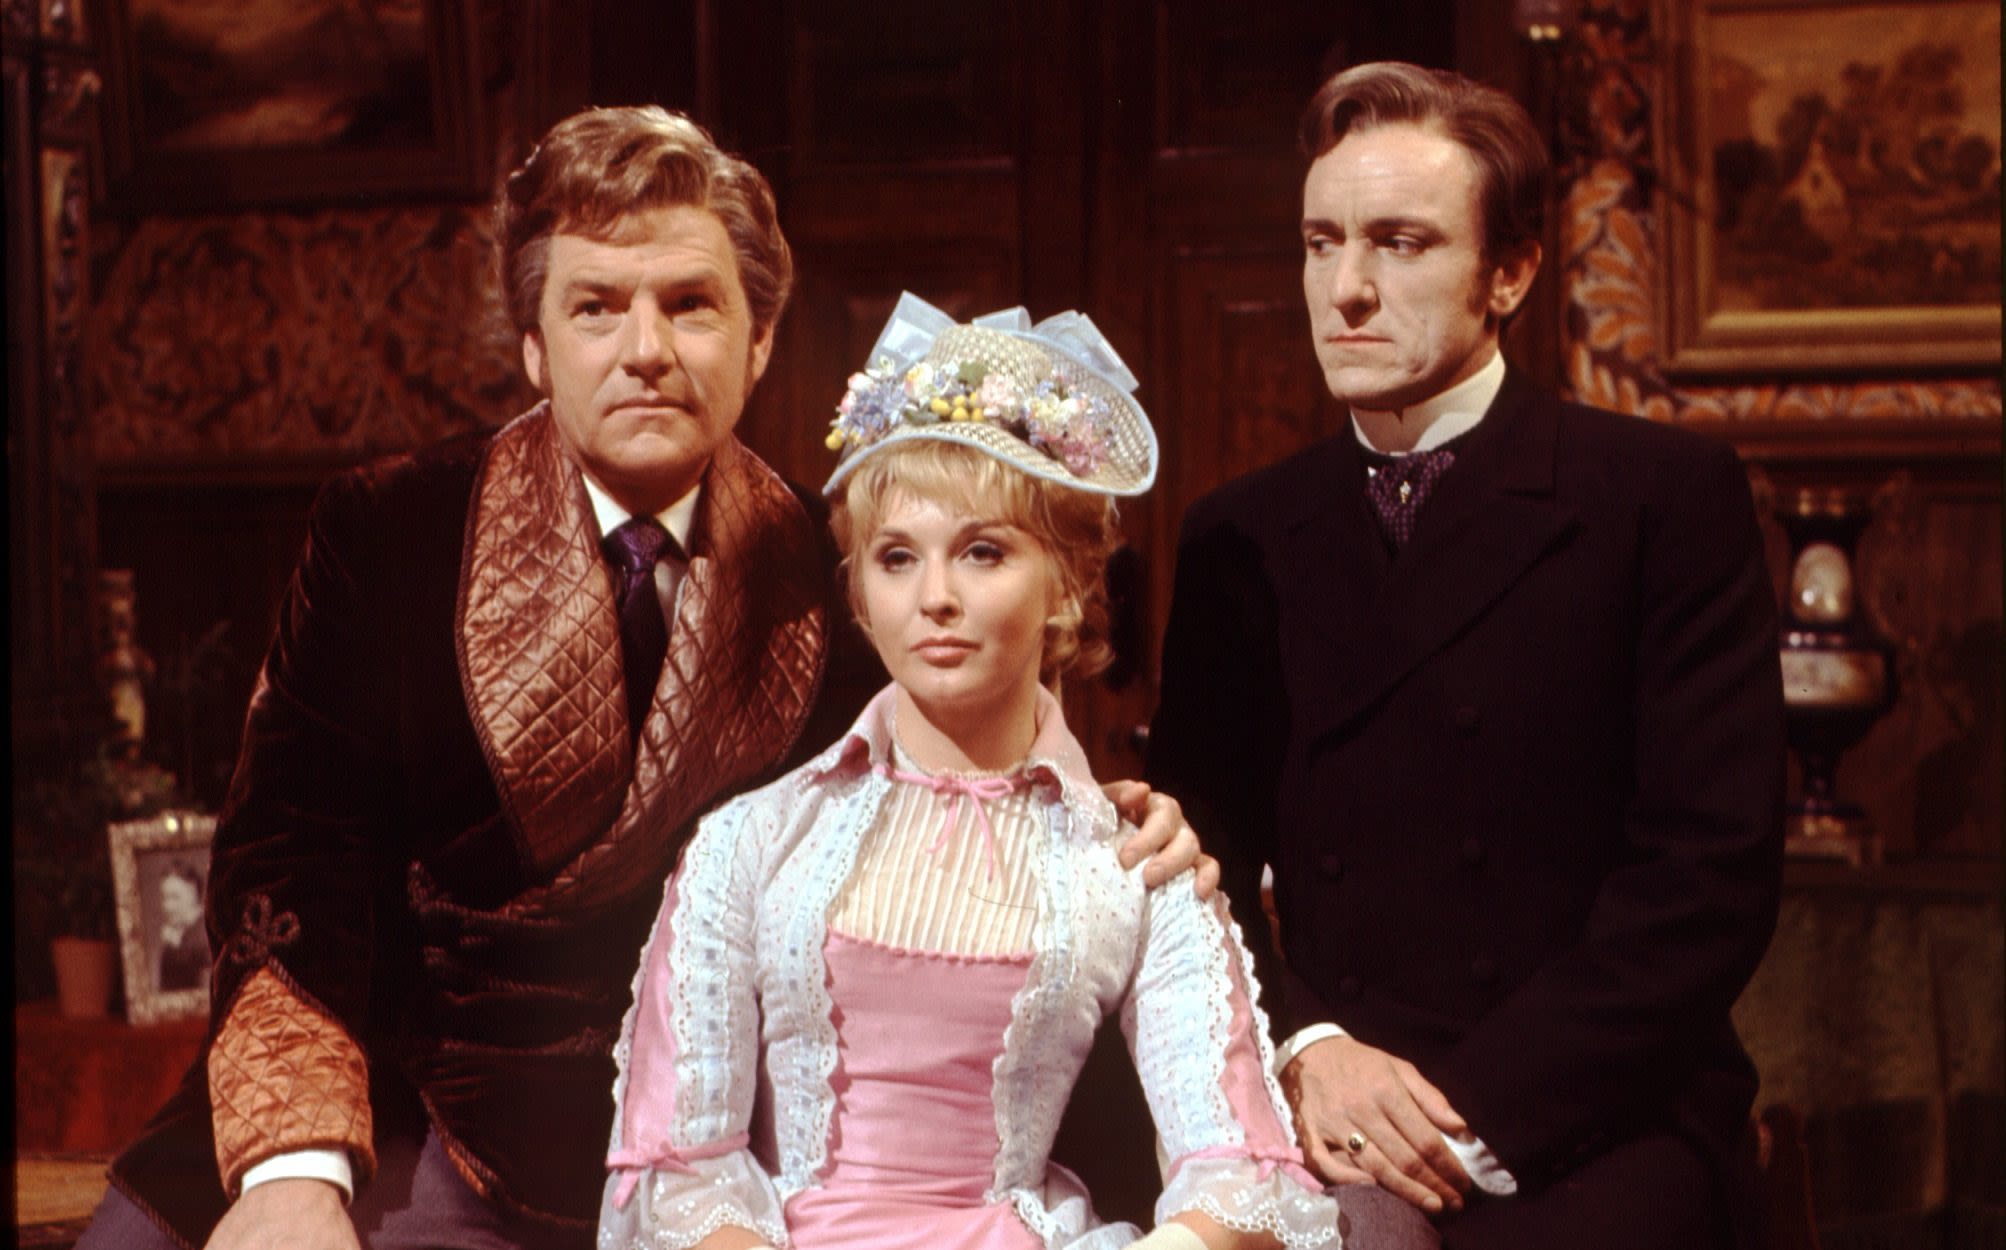 I welcome the return of The Forsyte Saga, but fear the culture police will cancel Soames